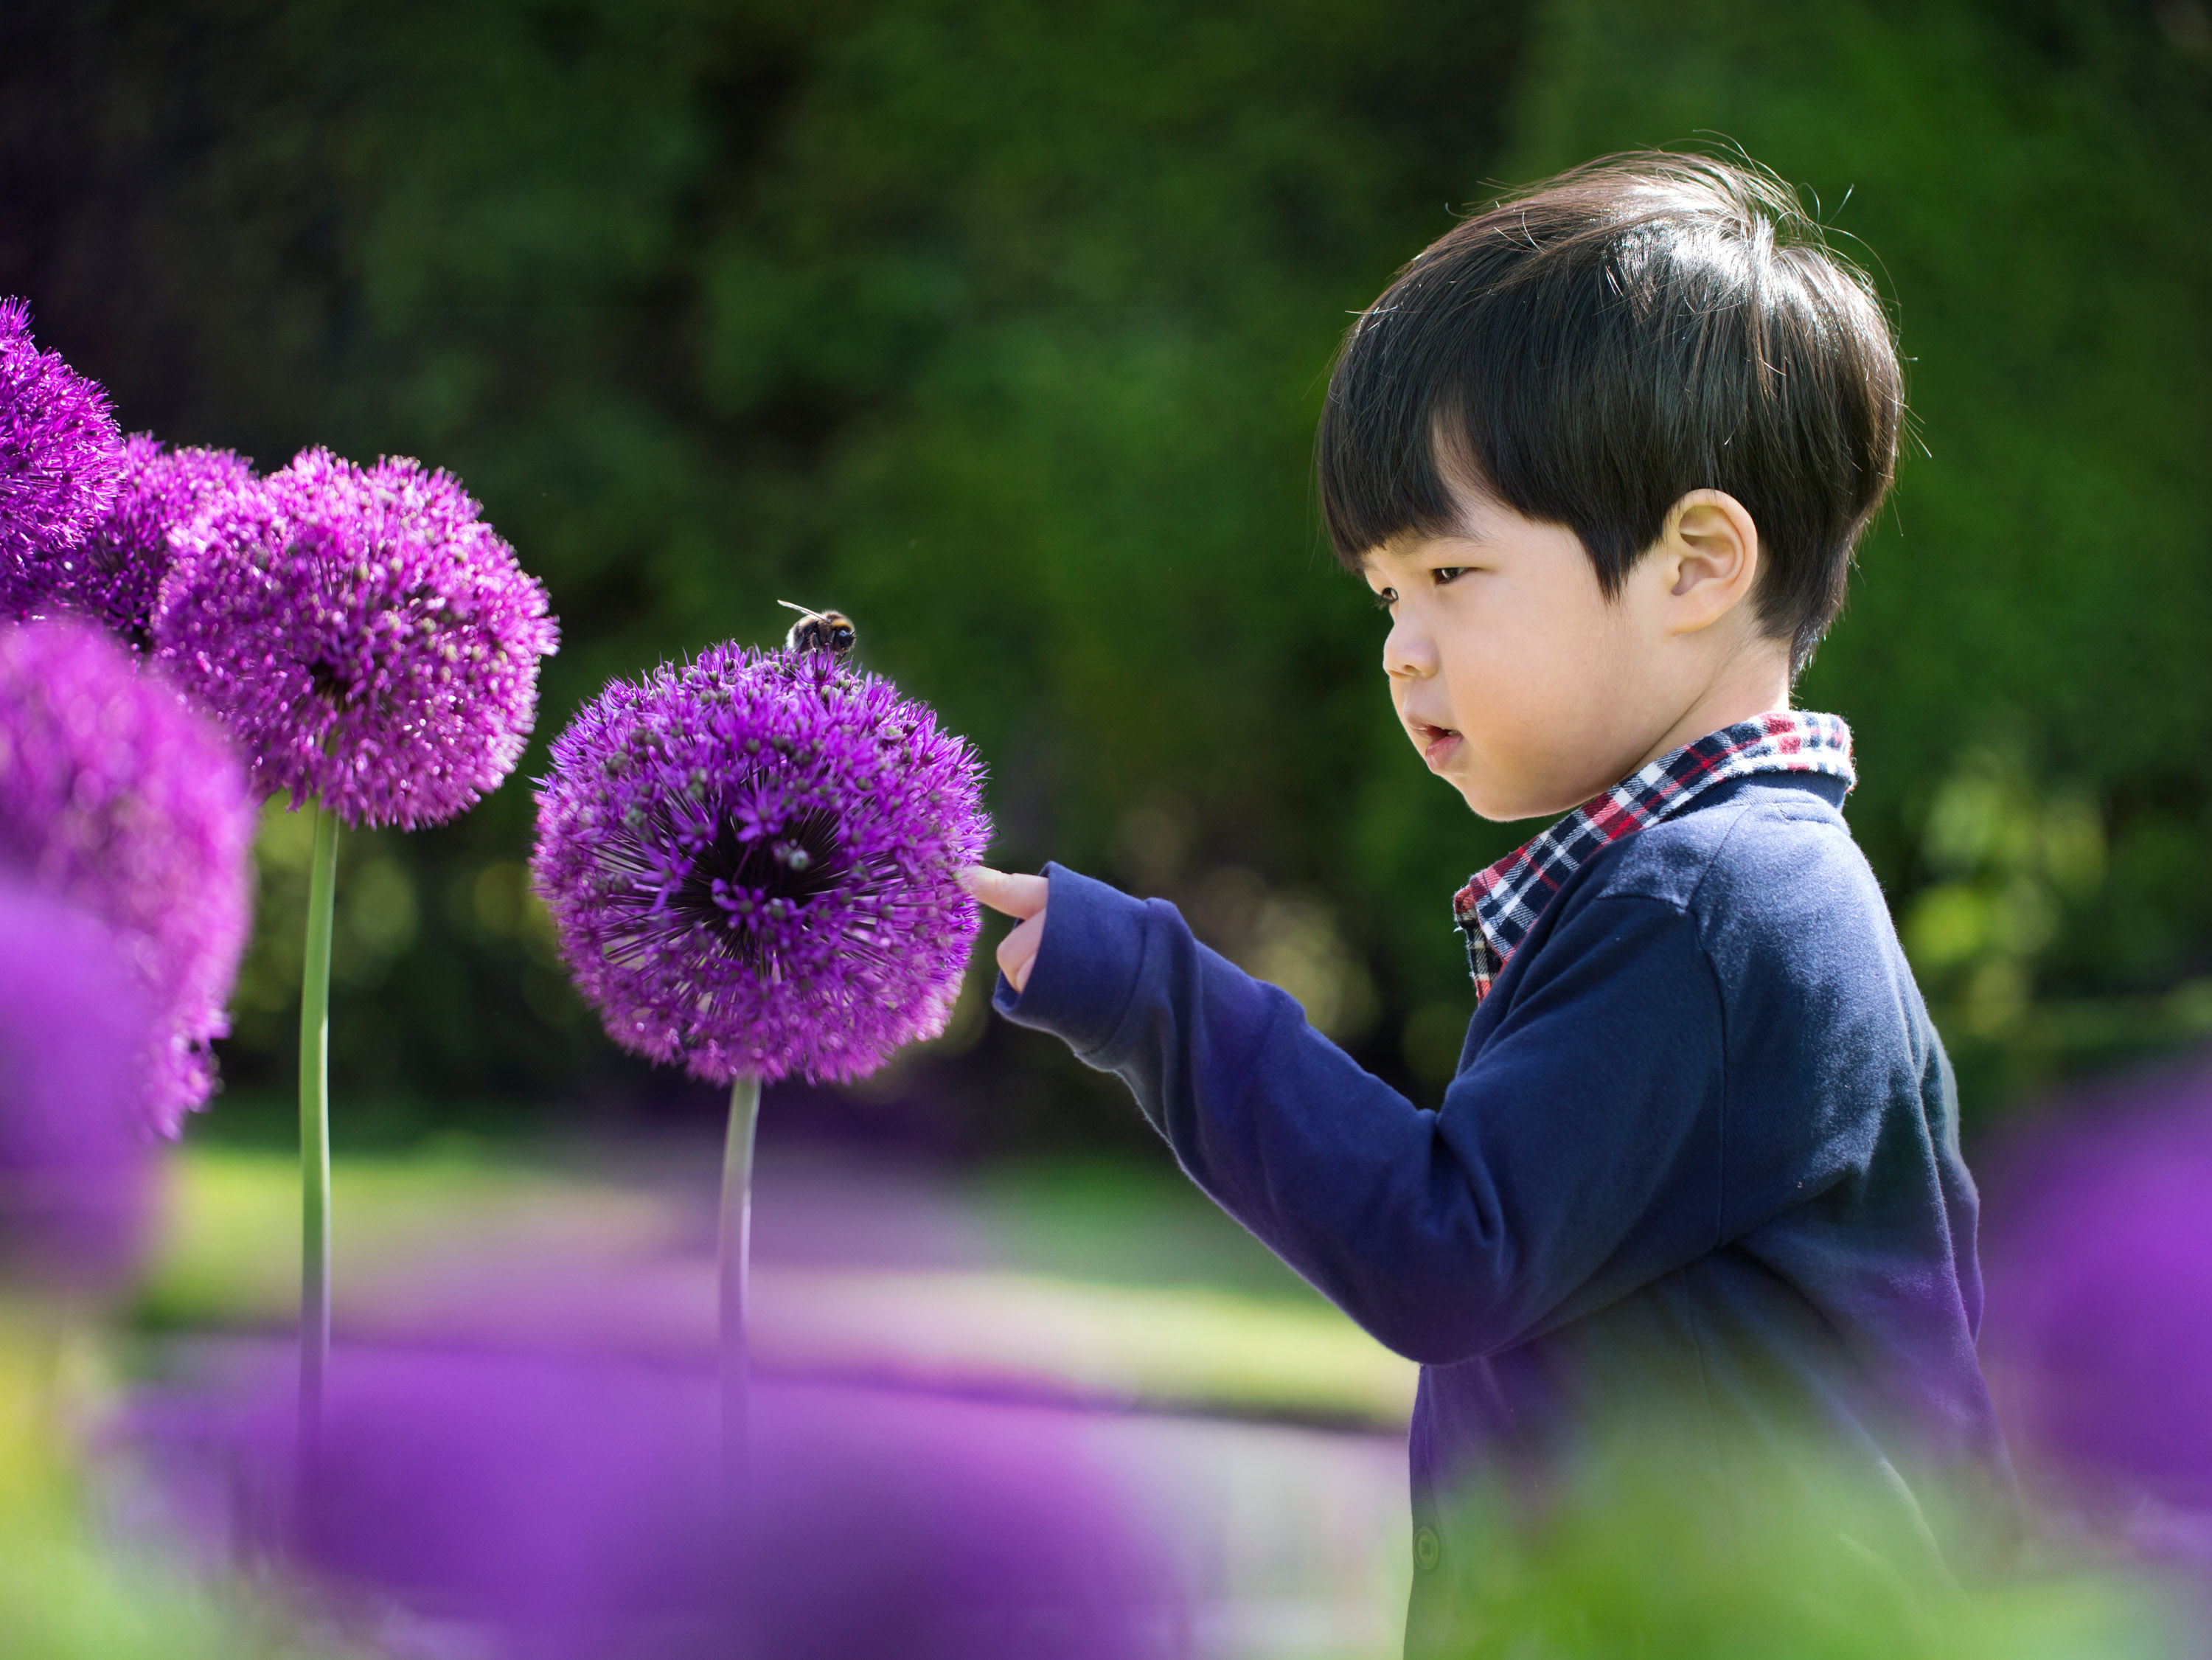 Asian toddler boy touching a spherical purple flower on which a bee is resting.